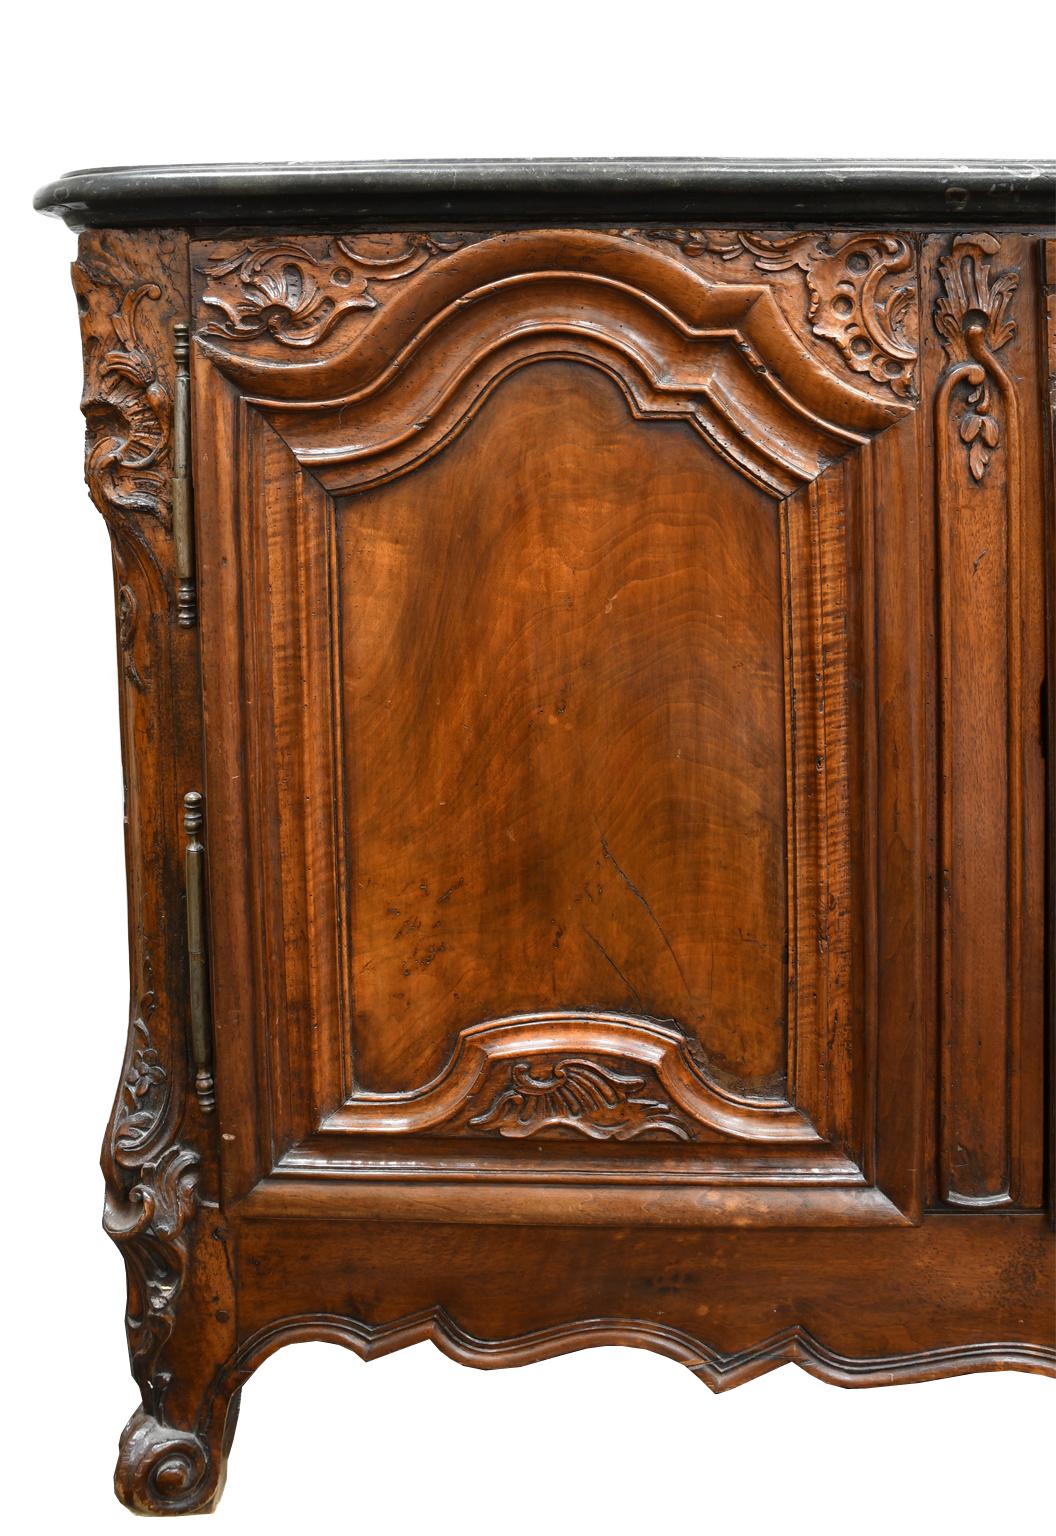 Hand-Carved 18th Century French Régence /Louis XV Carved Walnut Buffet with Black Marble Top